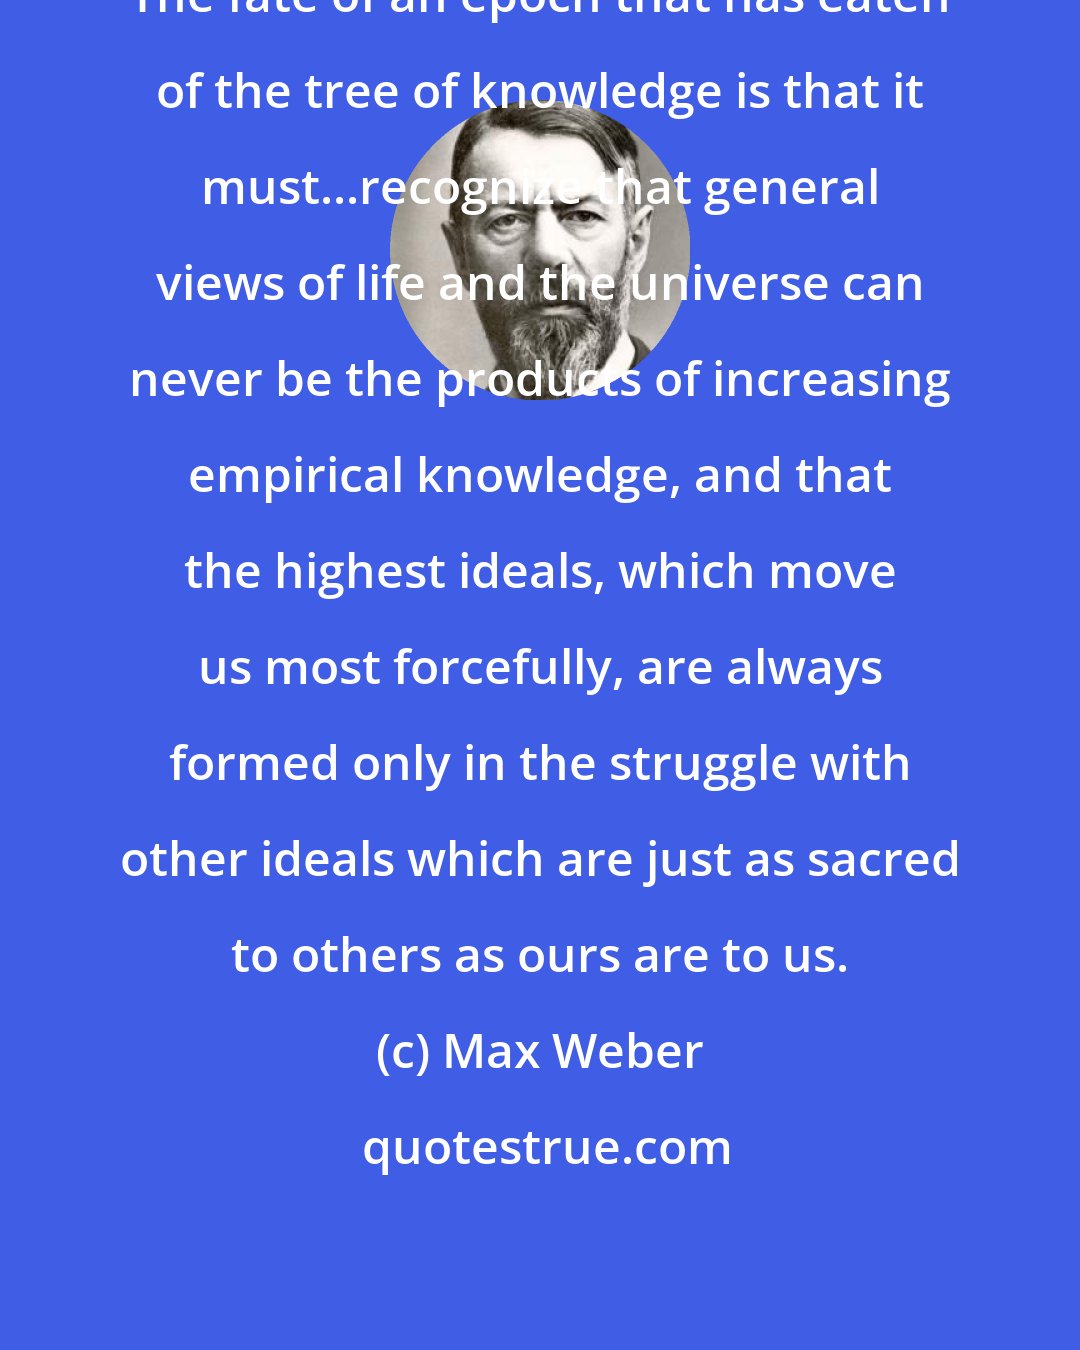 Max Weber: The fate of an epoch that has eaten of the tree of knowledge is that it must...recognize that general views of life and the universe can never be the products of increasing empirical knowledge, and that the highest ideals, which move us most forcefully, are always formed only in the struggle with other ideals which are just as sacred to others as ours are to us.